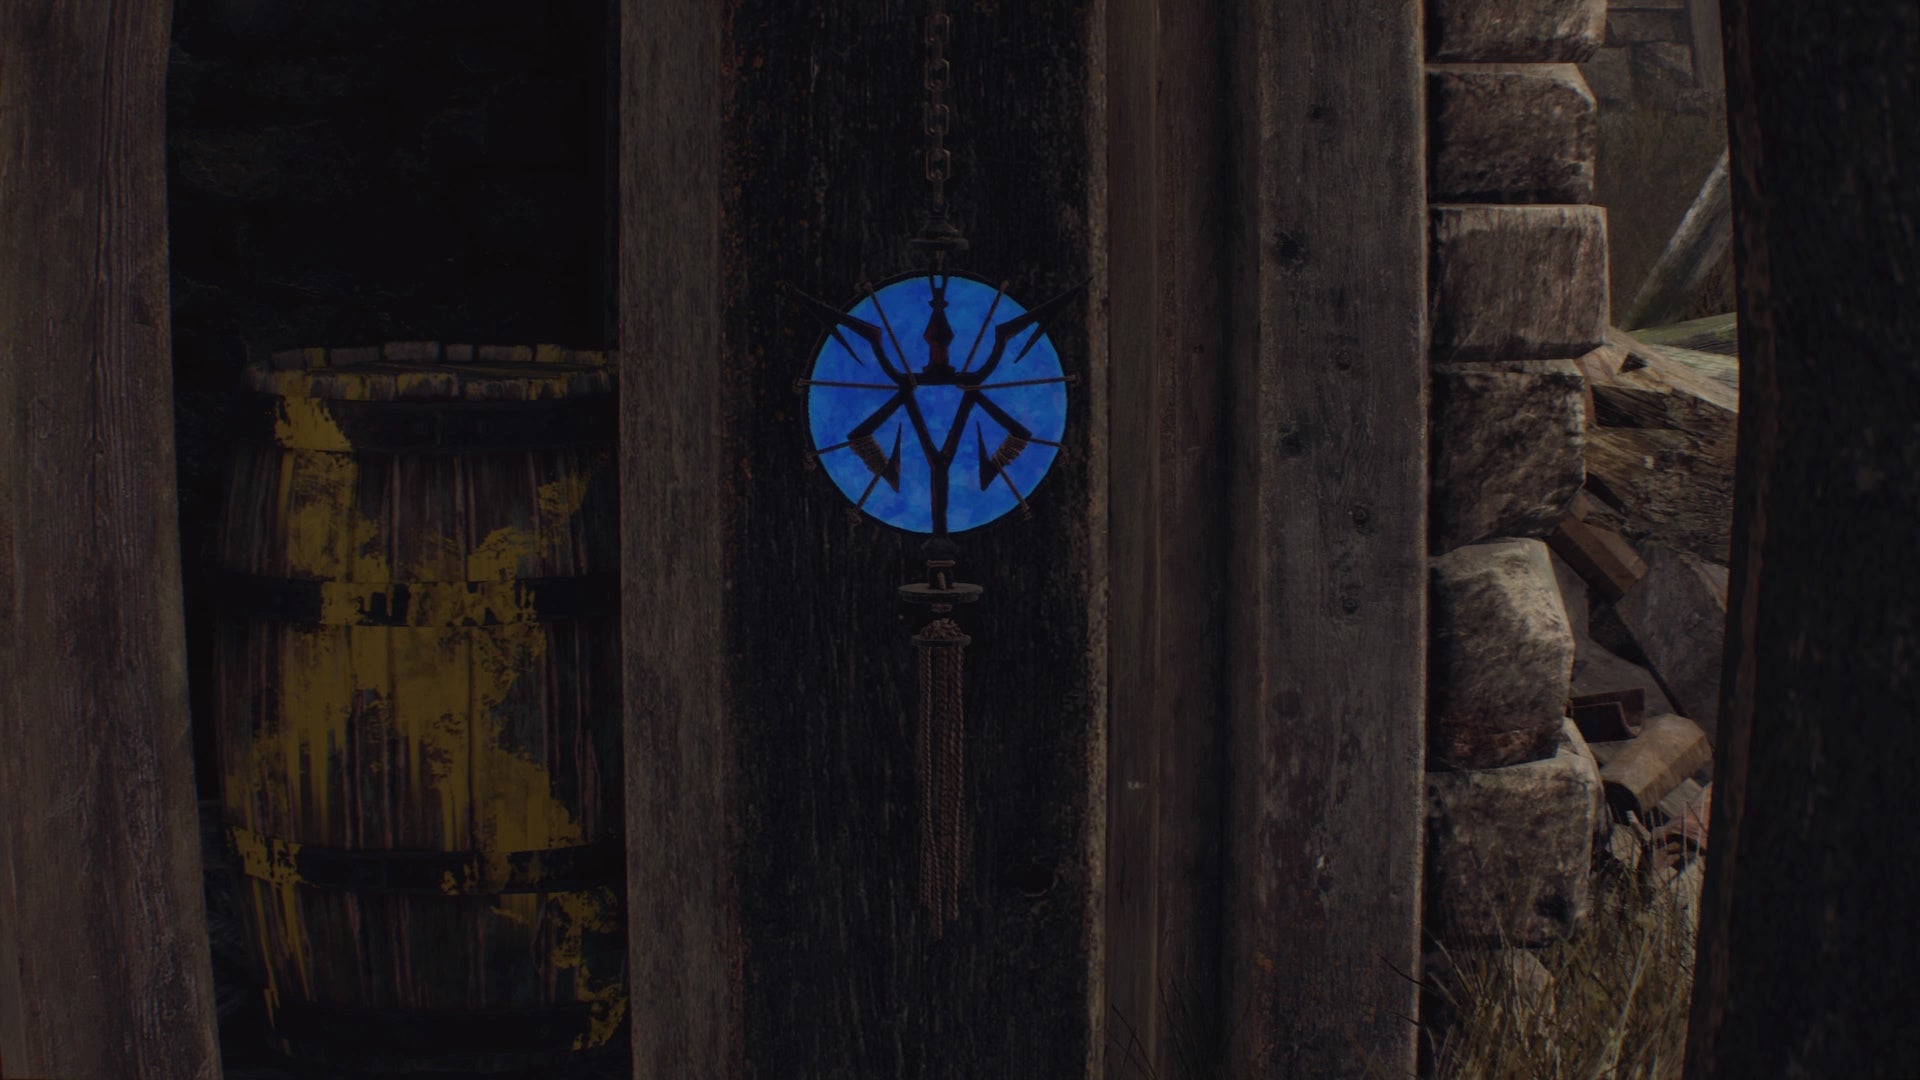 Image for Resident Evil 4 blue medallion locations for all 'Destroy the Blue Medallions' Requests